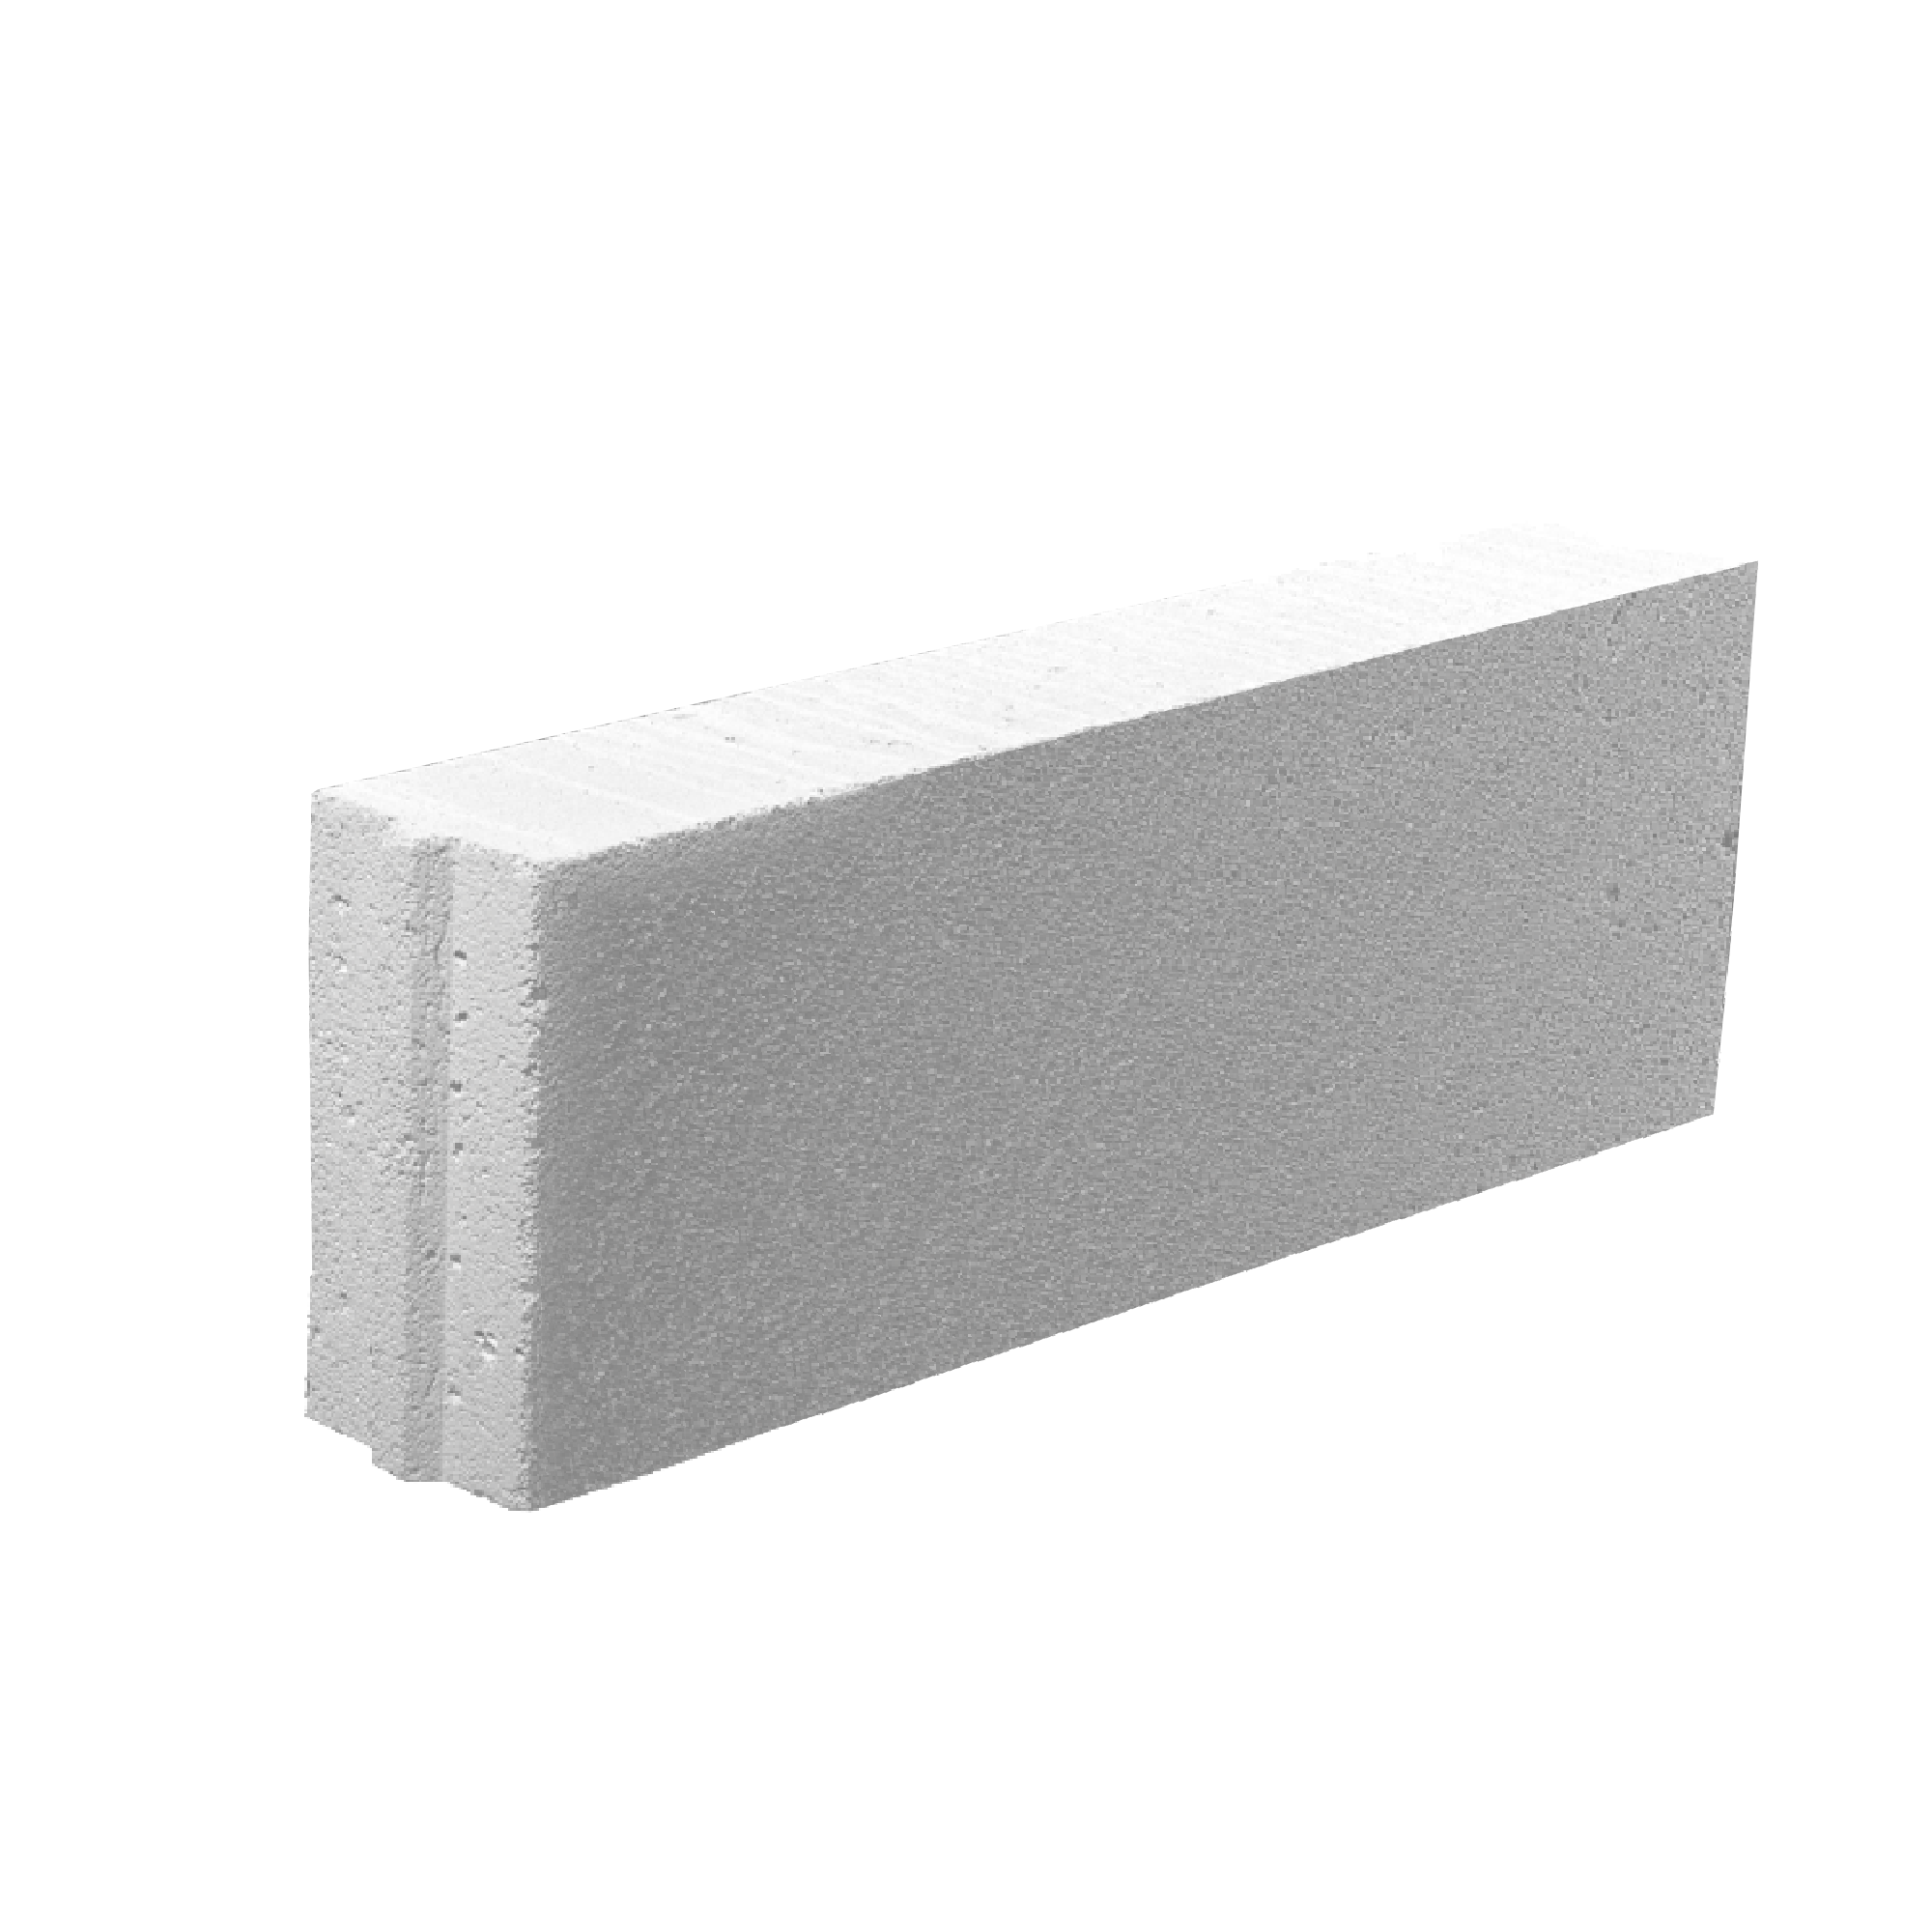 AAC Joggle Joint - AAC Ytong Interio D0.5, 599 x 100 x 199 mm joggle joint, https:maxbau.ro